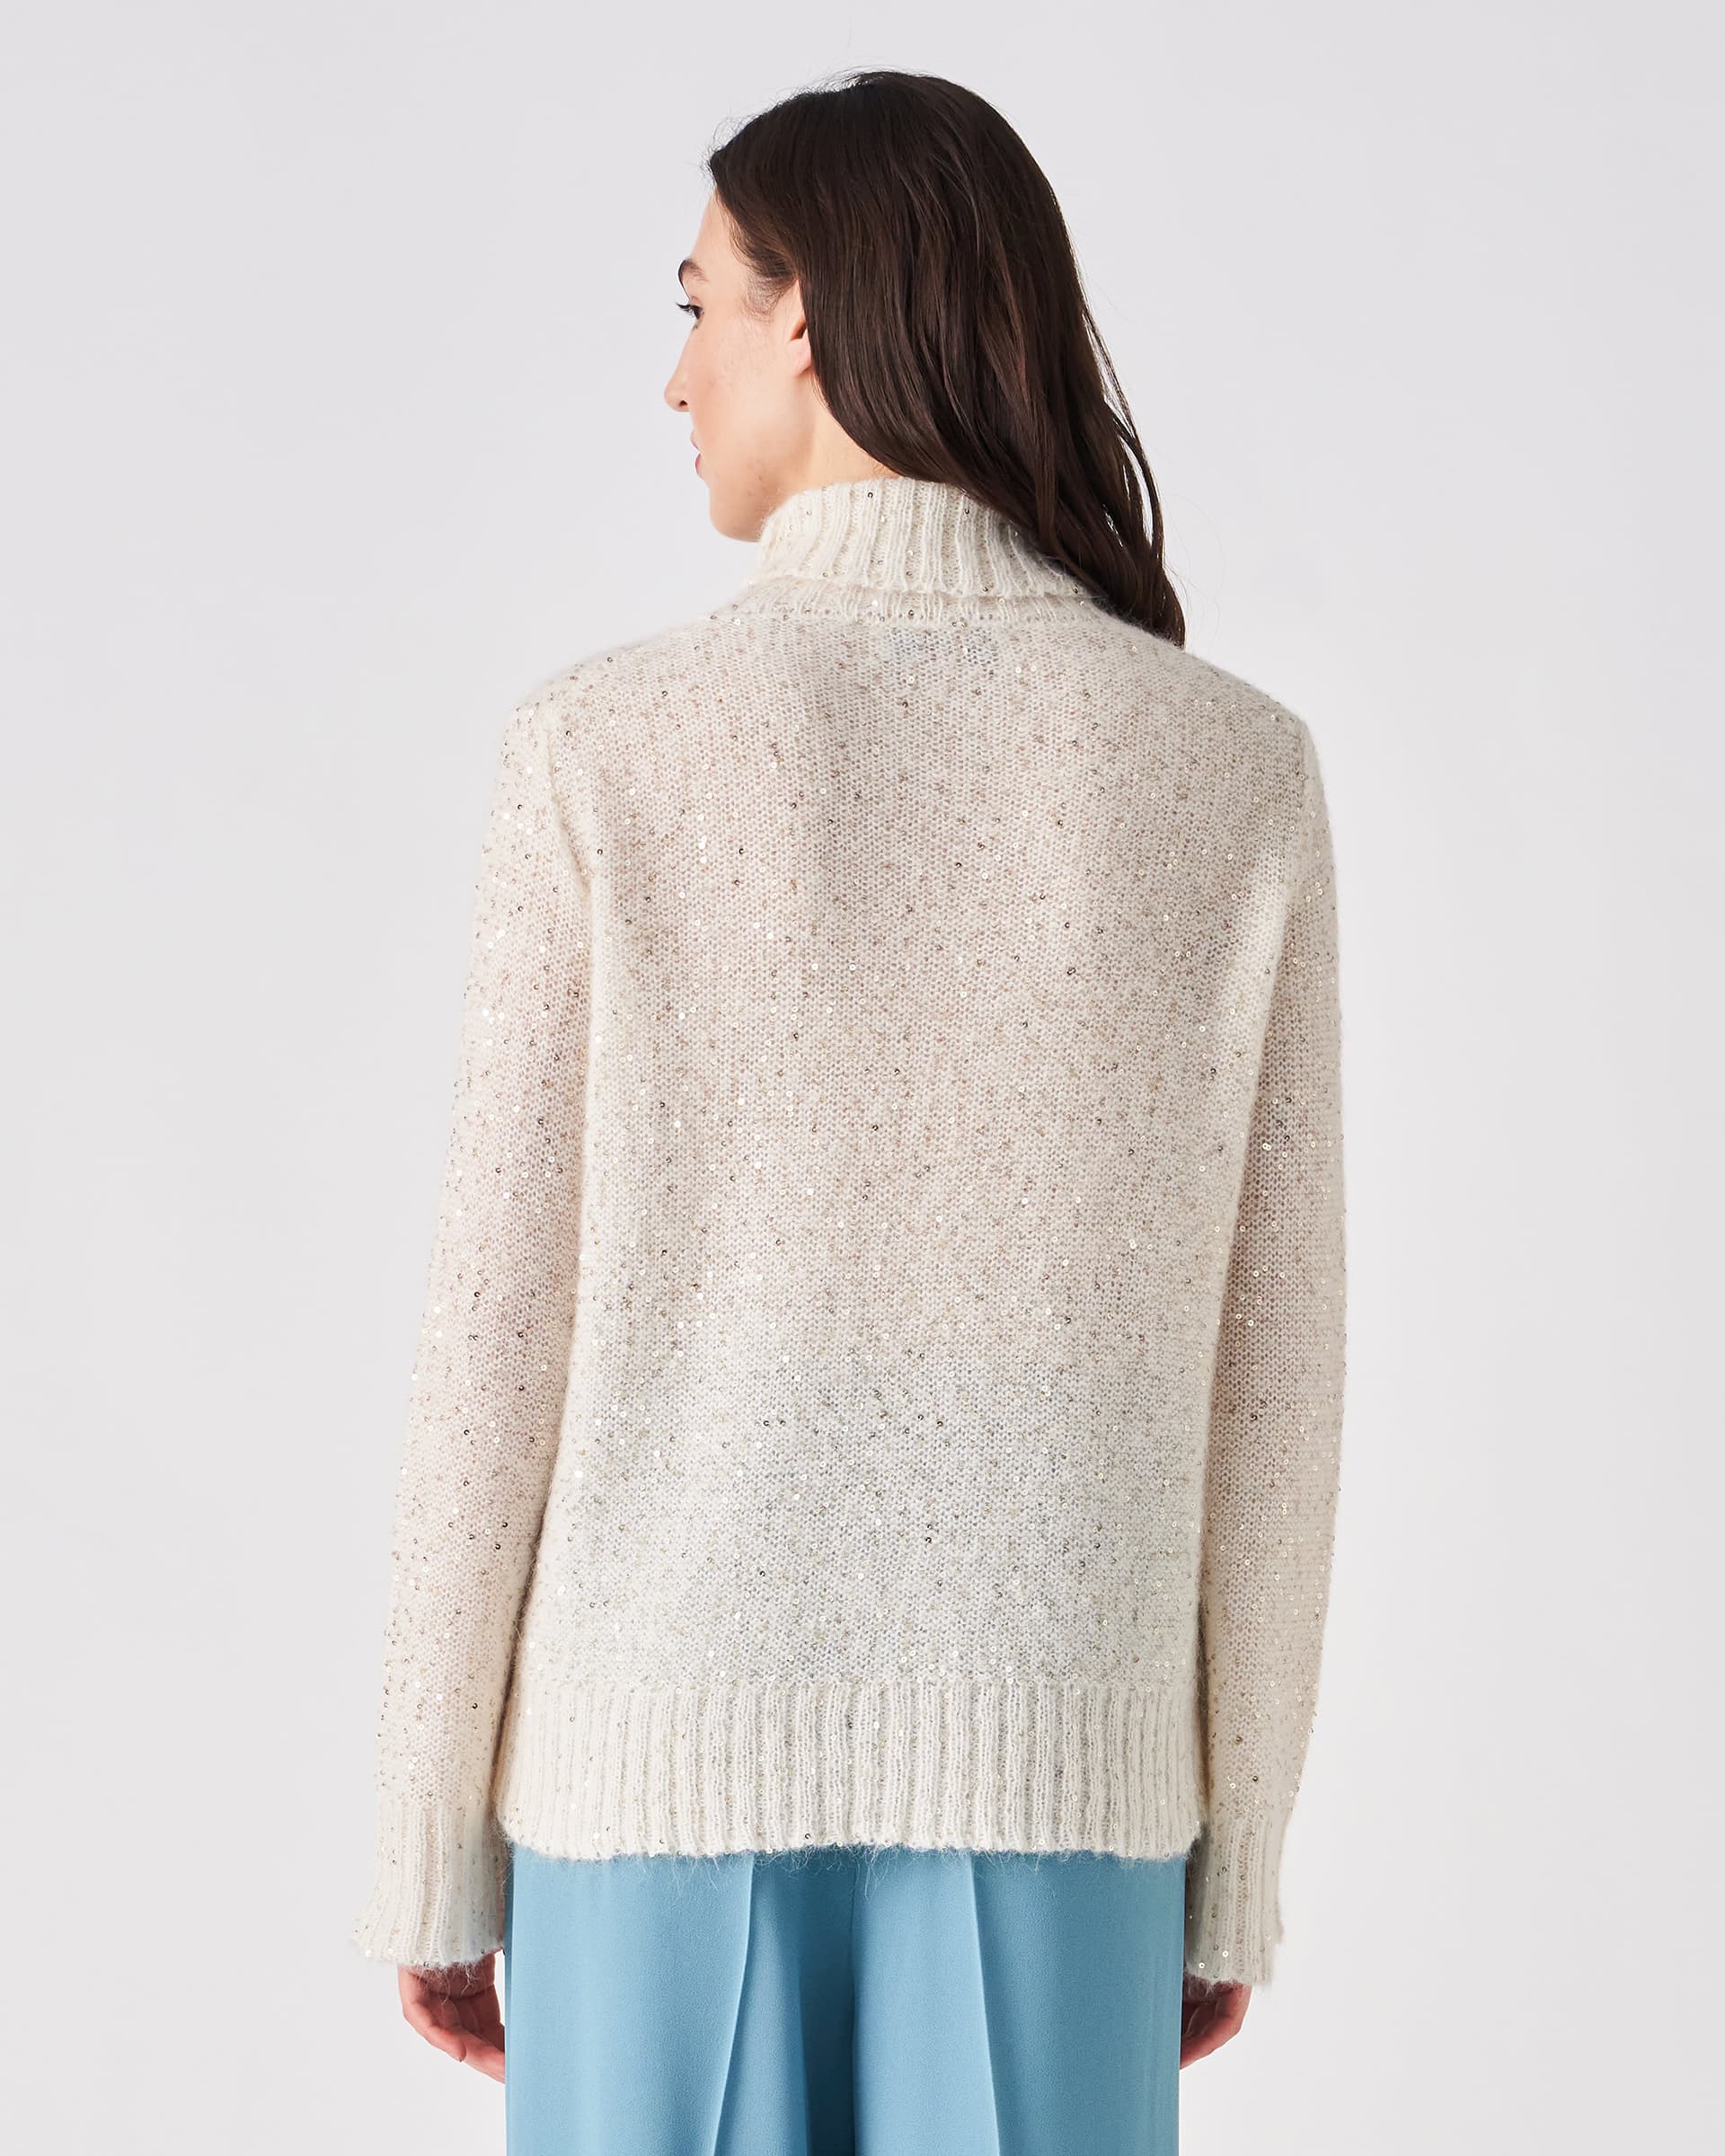 The Market Store | Turtleneck Sweater In Sequins